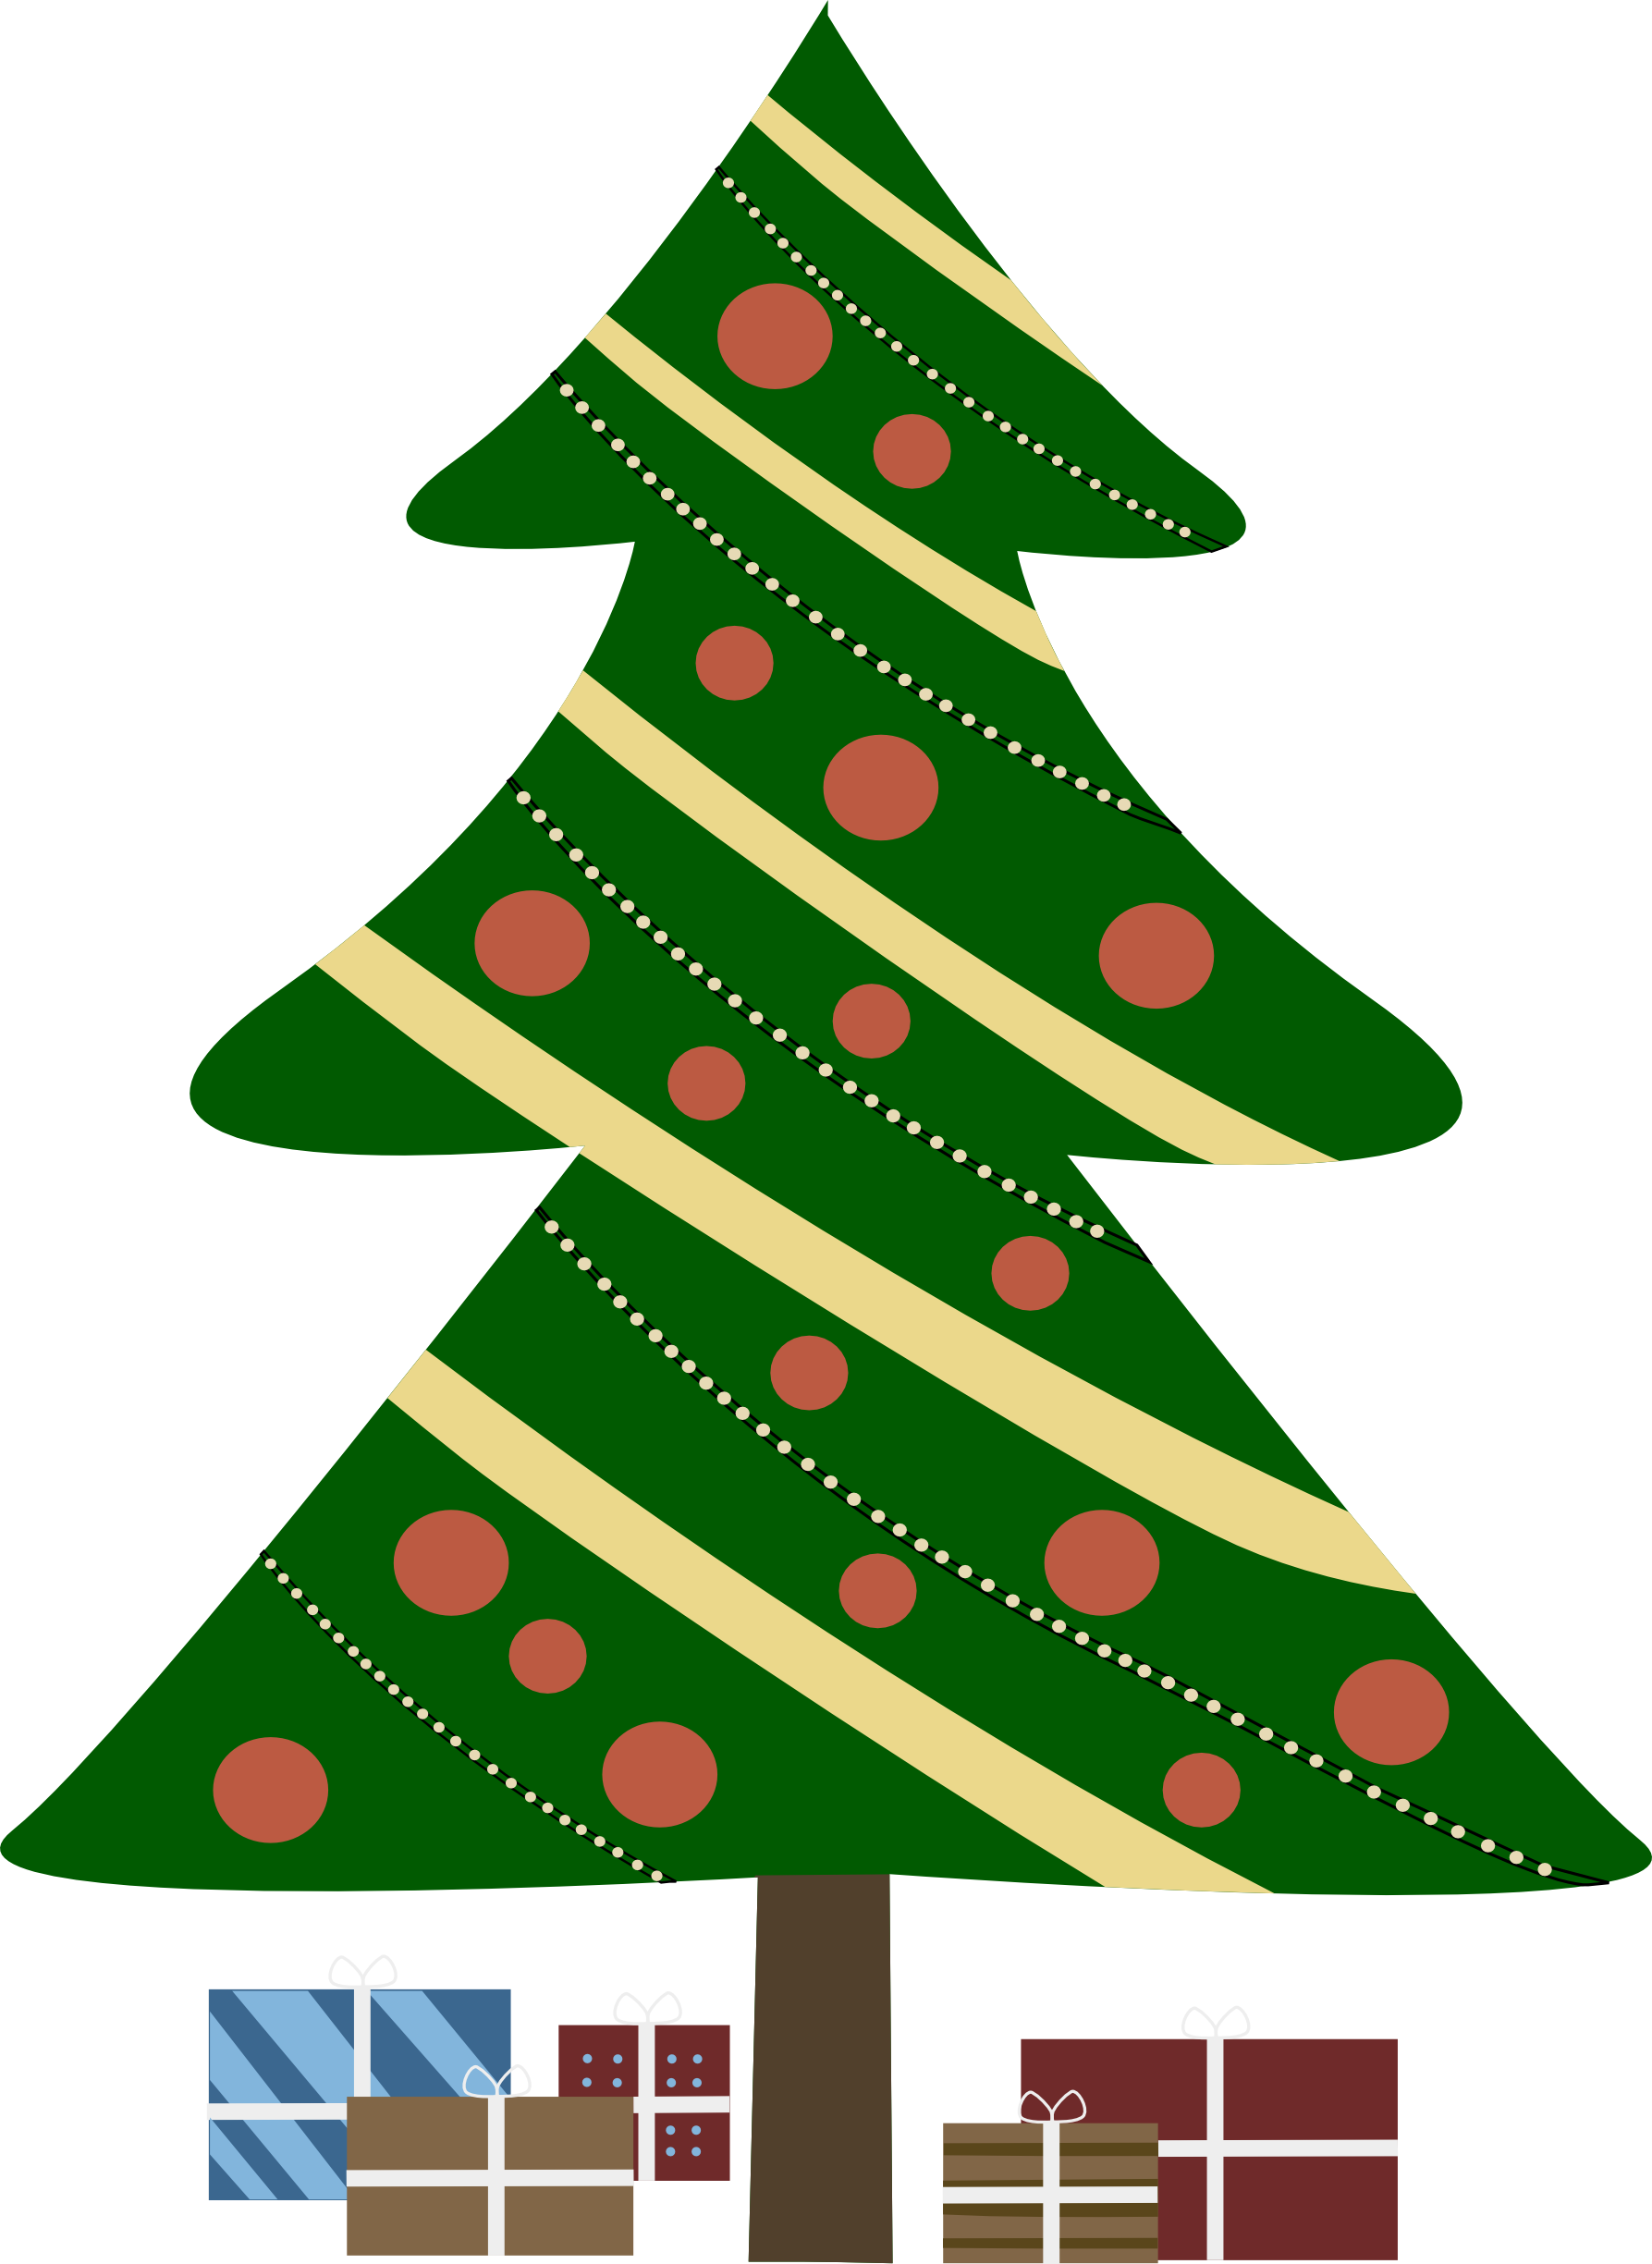 Xmas Stuff For > Christmas Tree Cartoon Png - Cliparts.co